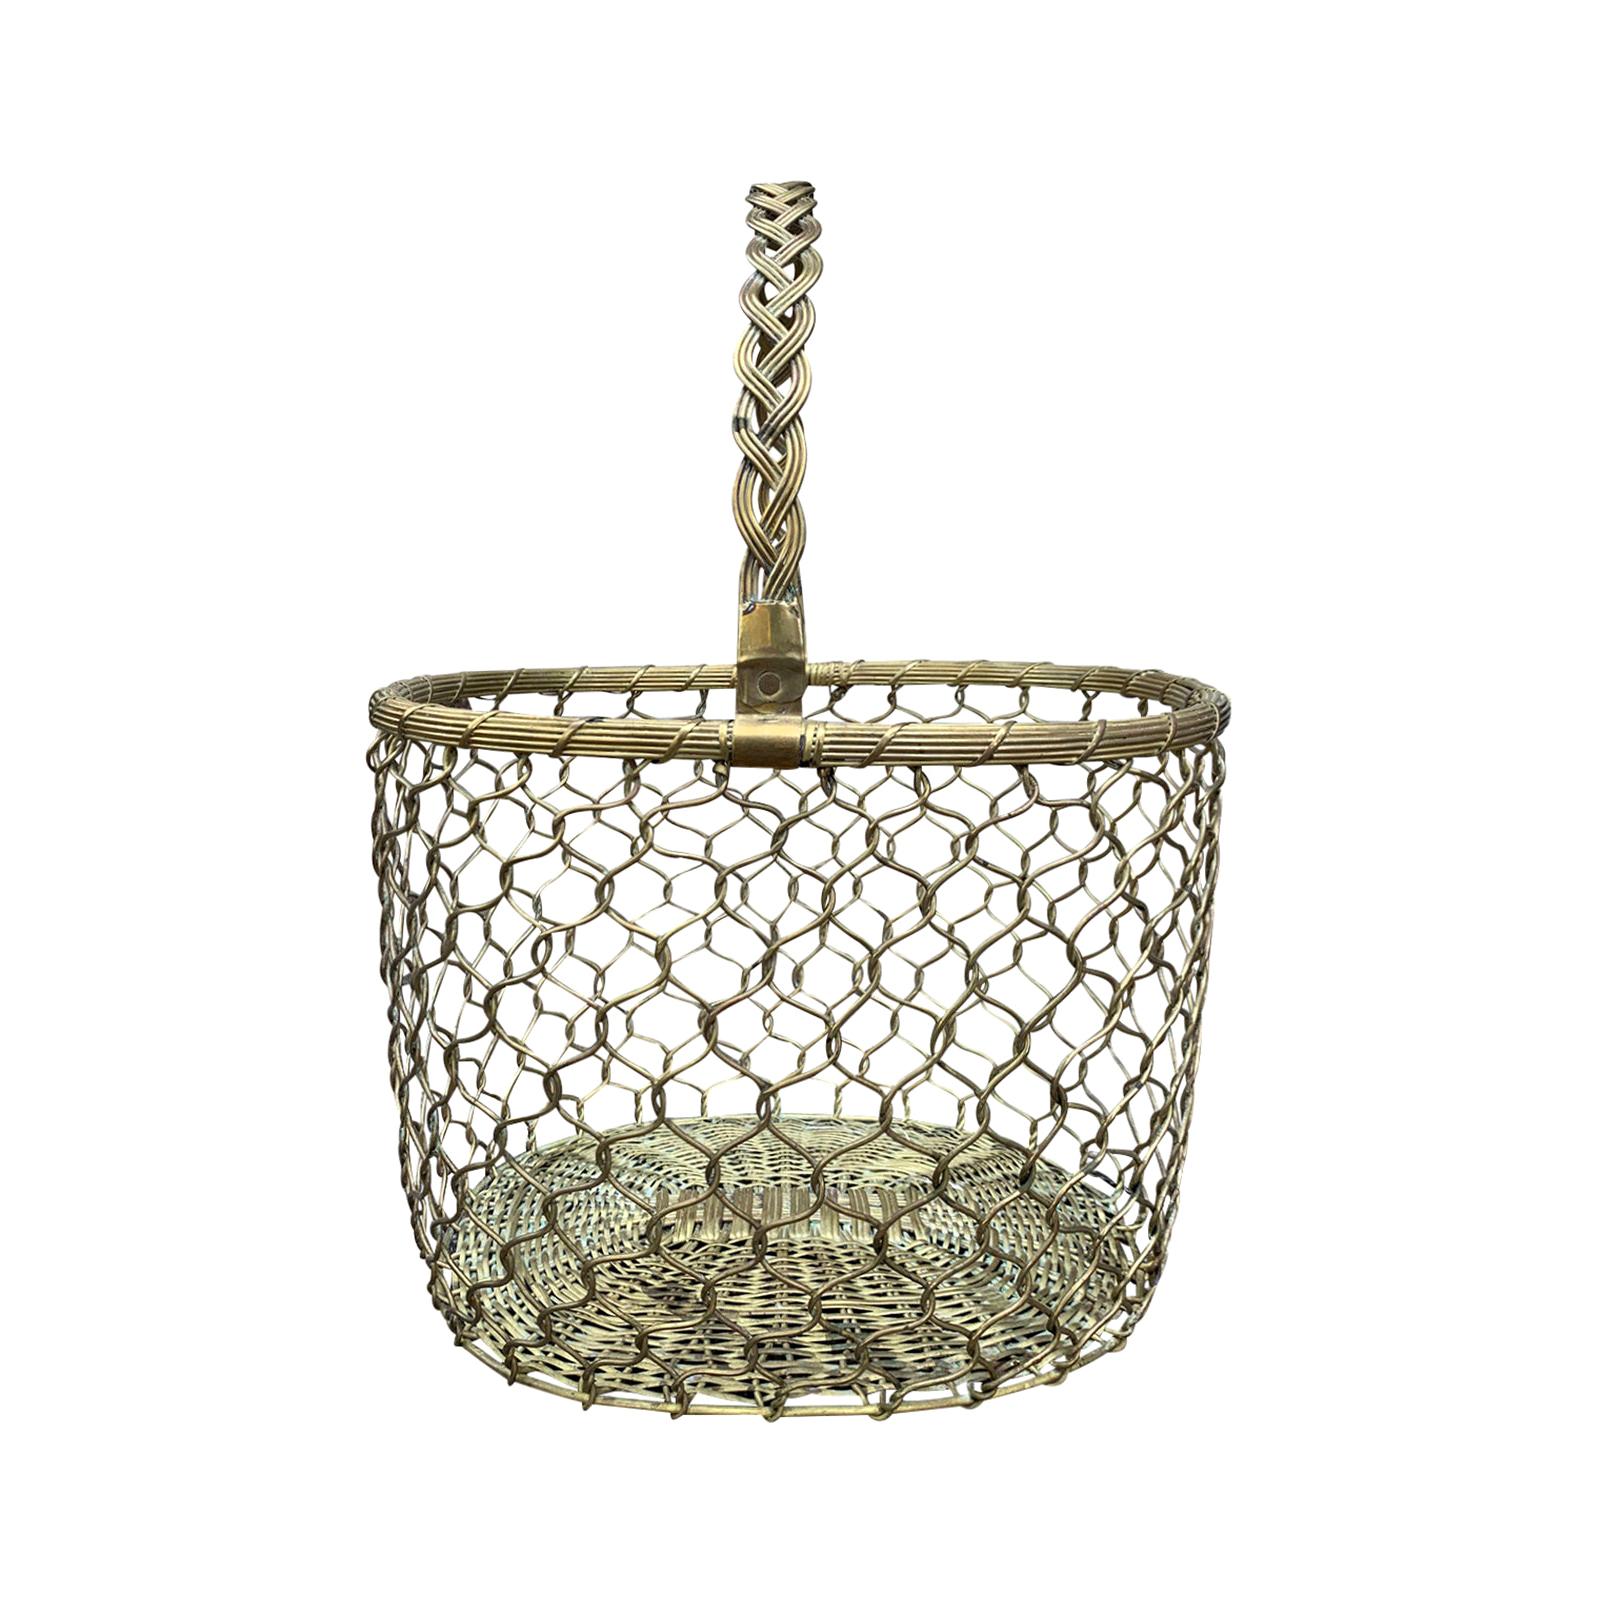 Mid-20th Century Italian Brass Wire Basket with Braided Handle